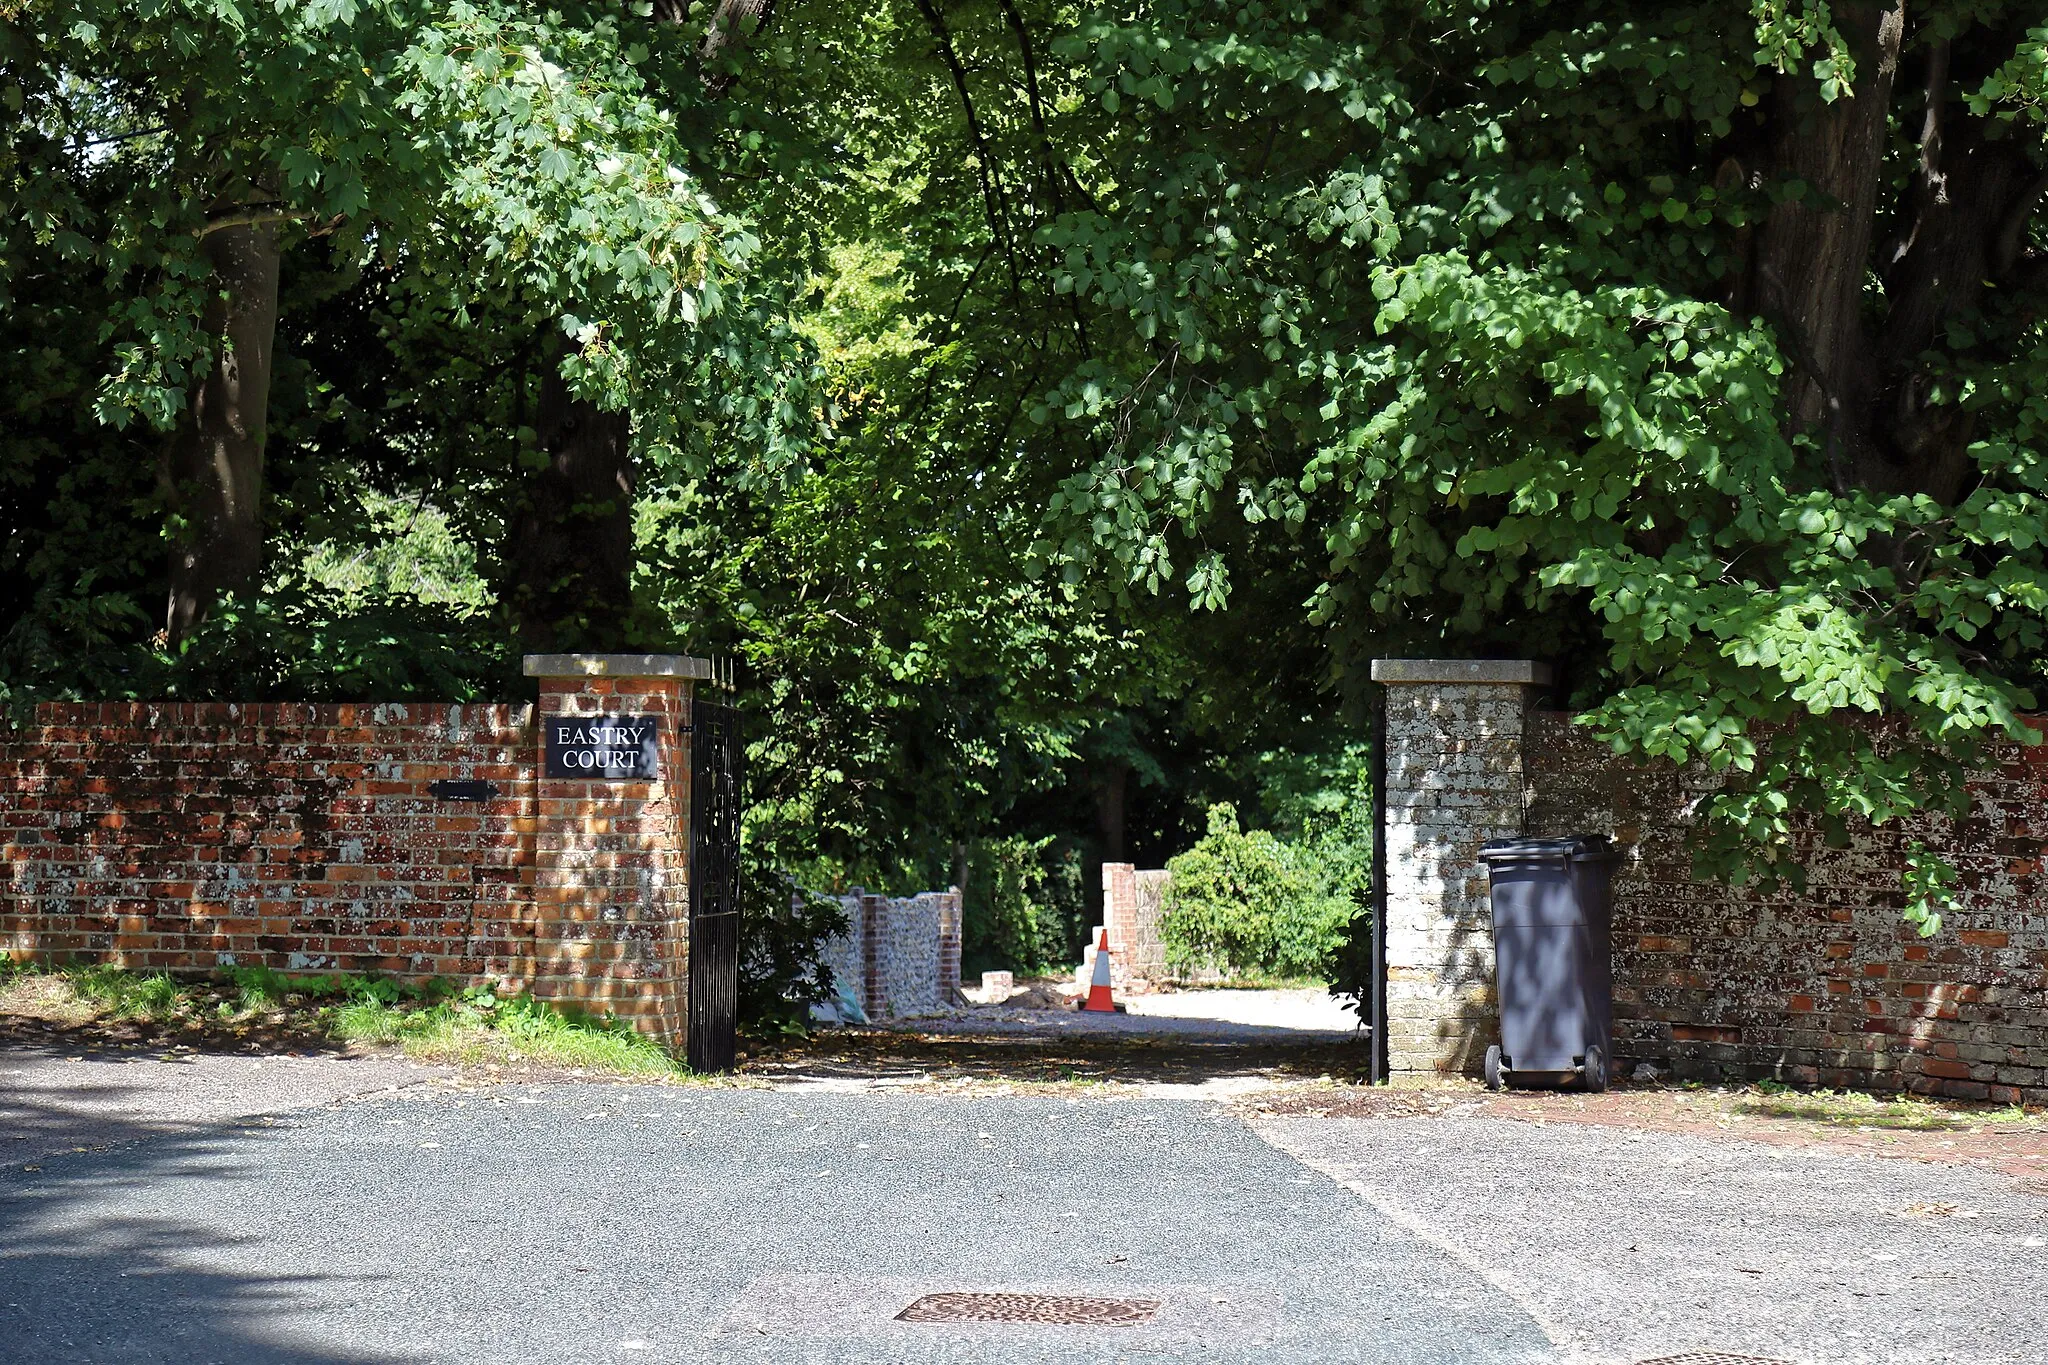 Photo showing: The gateway and private road to Eastry Court, a Grade I listed house on Church Street in Eastry, Kent, England. Time Team investigated this property and the wider village area for major Anglo Saxon settlement: "Time Team S13-E06". As at 2018, Eastry Court is home to Lord Freud, the great-grandson to psychoanalyst Sigmund Freud.
Camera: Canon EOS 6D Mark II with Canon EF 24-105mm F4L IS USM lens. Software: File lens-corrected, optimized, perhaps cropped, with DxO OpticsPro 11 Elite, and likely further optimized with Adobe Photoshop CS2.